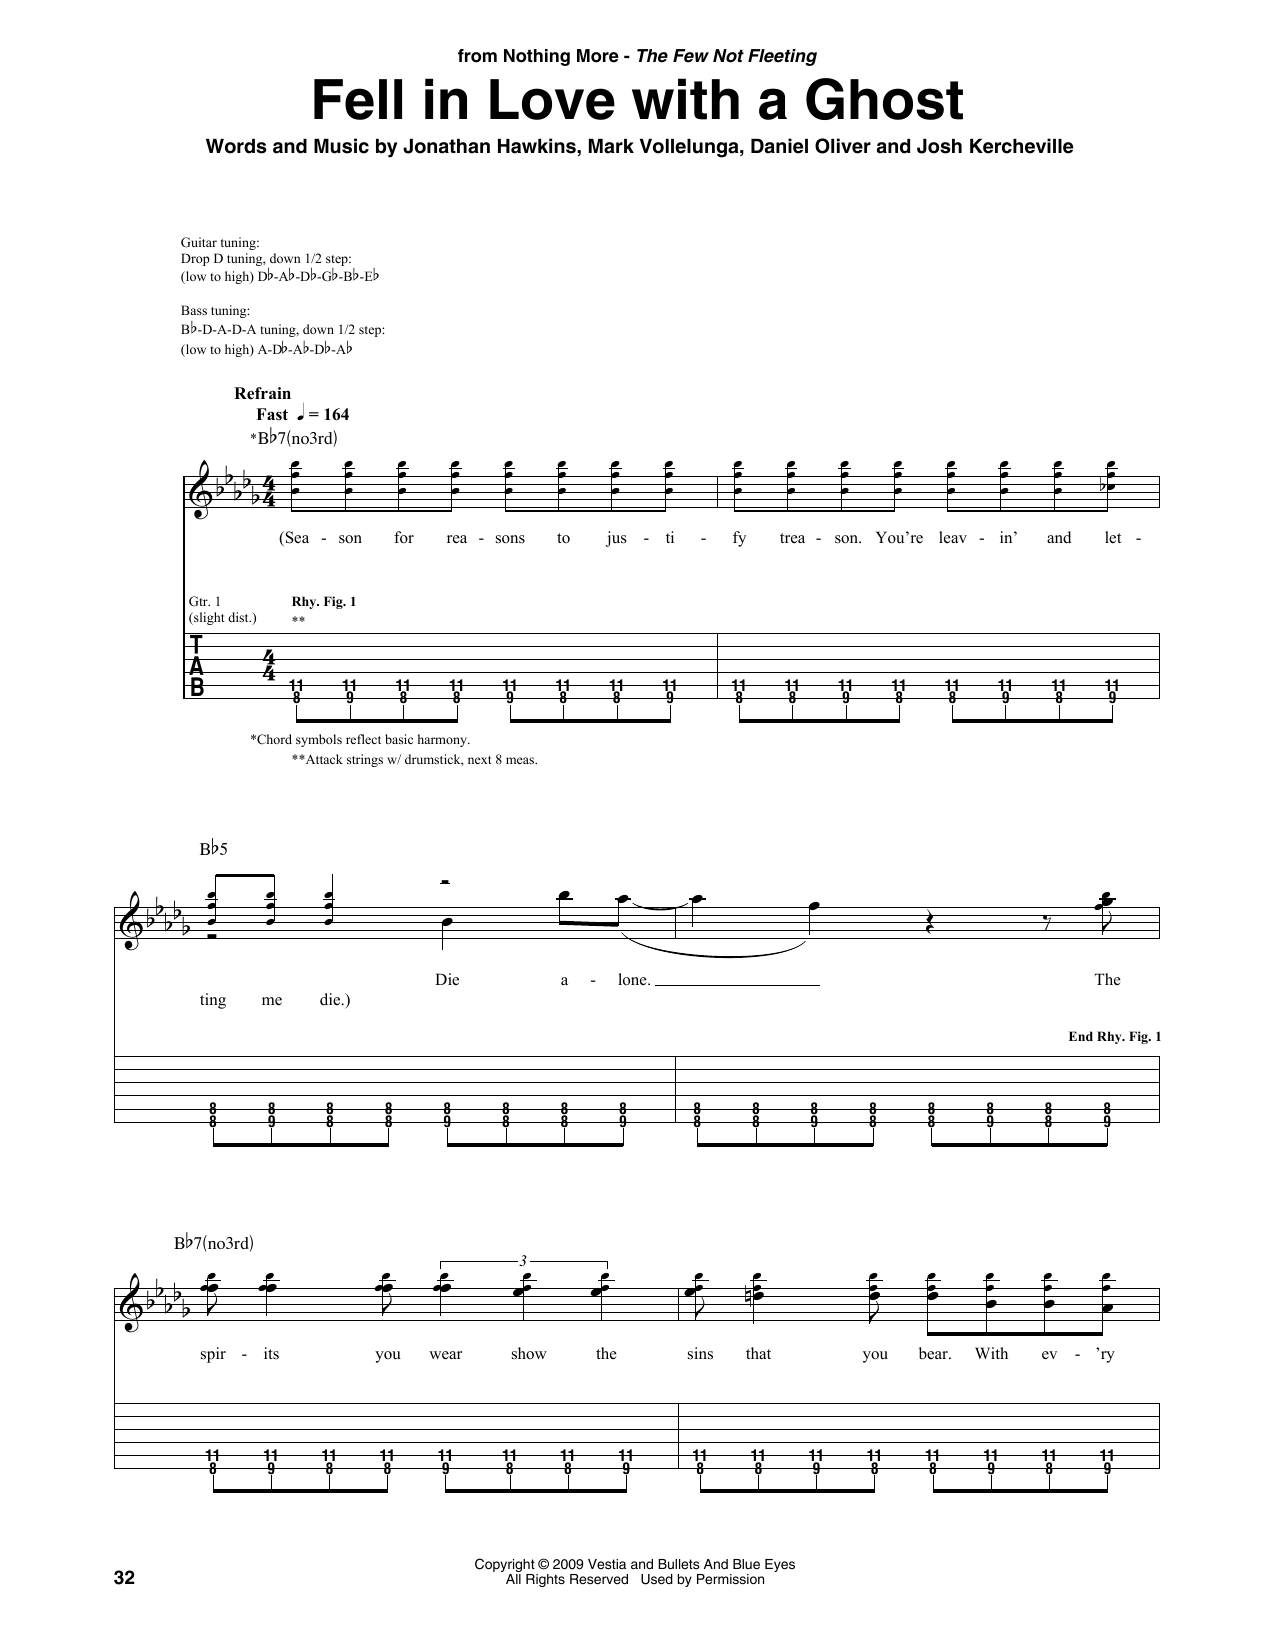 Download Nothing More Fell In Love With A Ghost Sheet Music